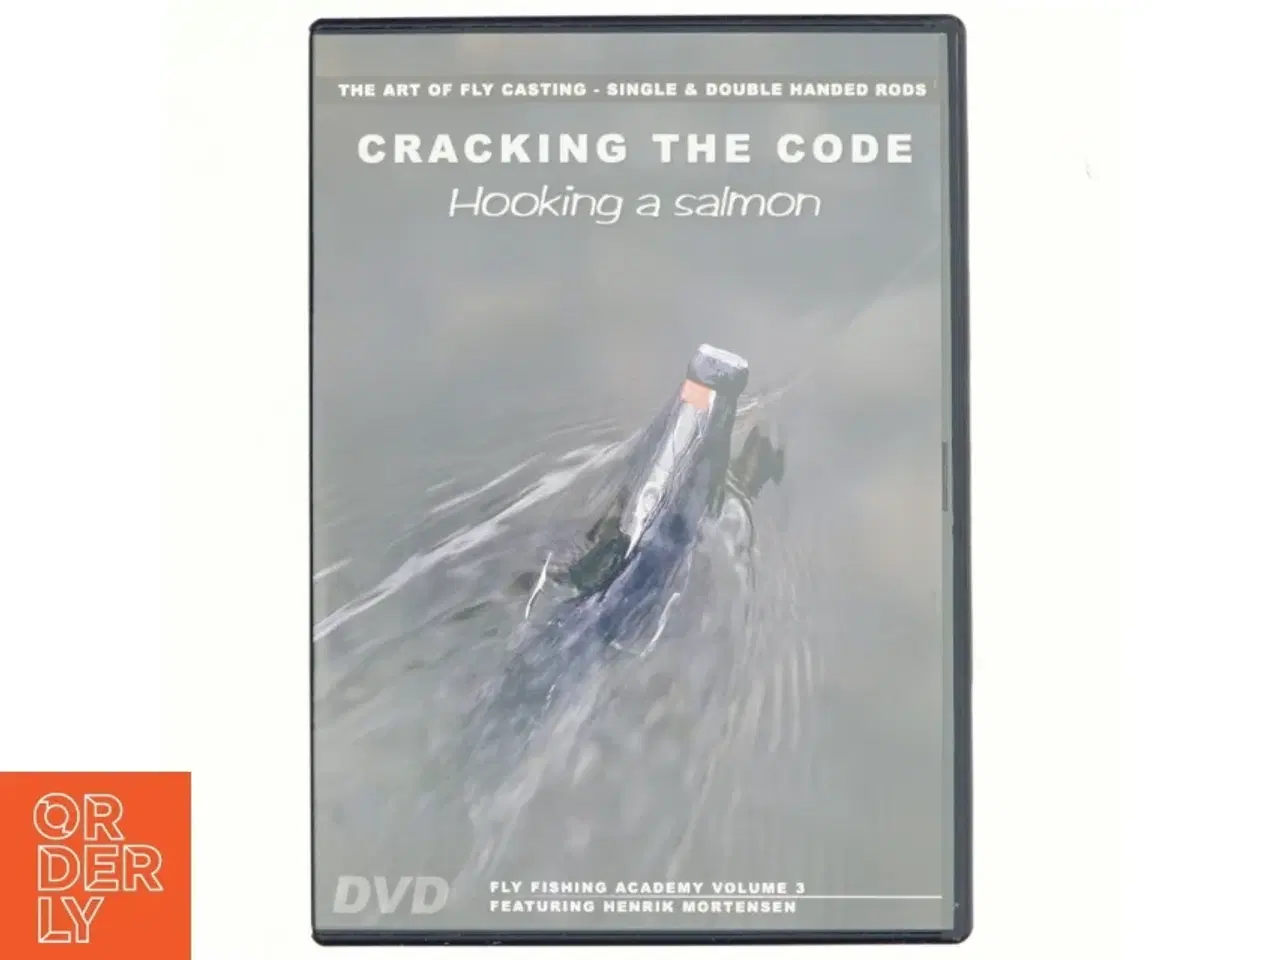 Billede 1 - Cracking the code, hooking a salmon